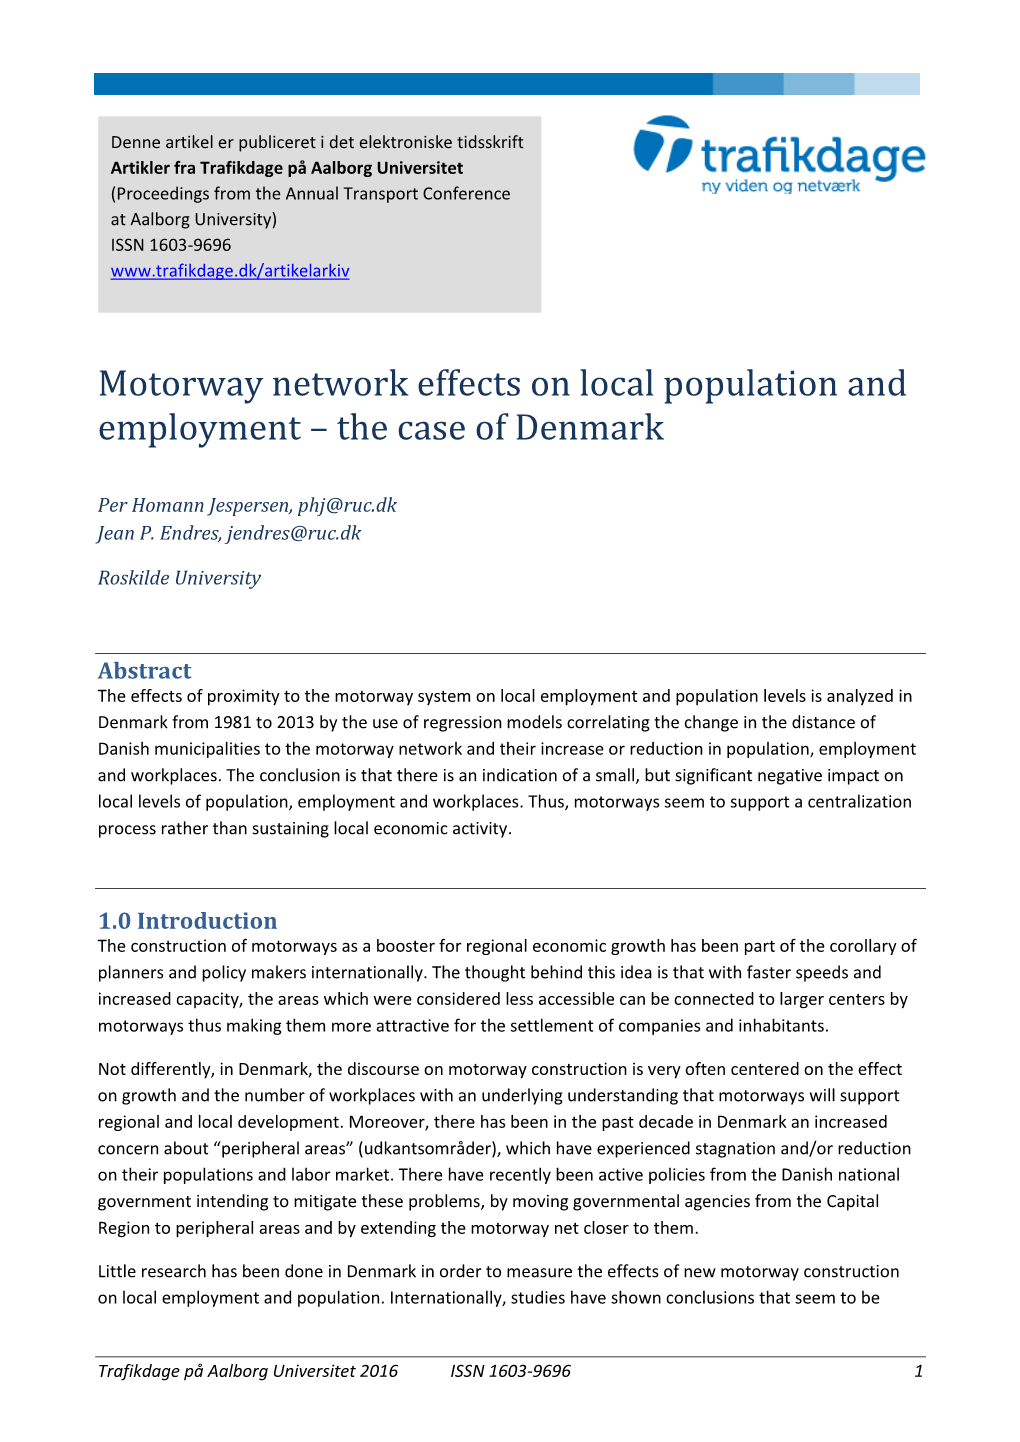 Motorway Network Effects on Local Population and Employment – the Case of Denmark